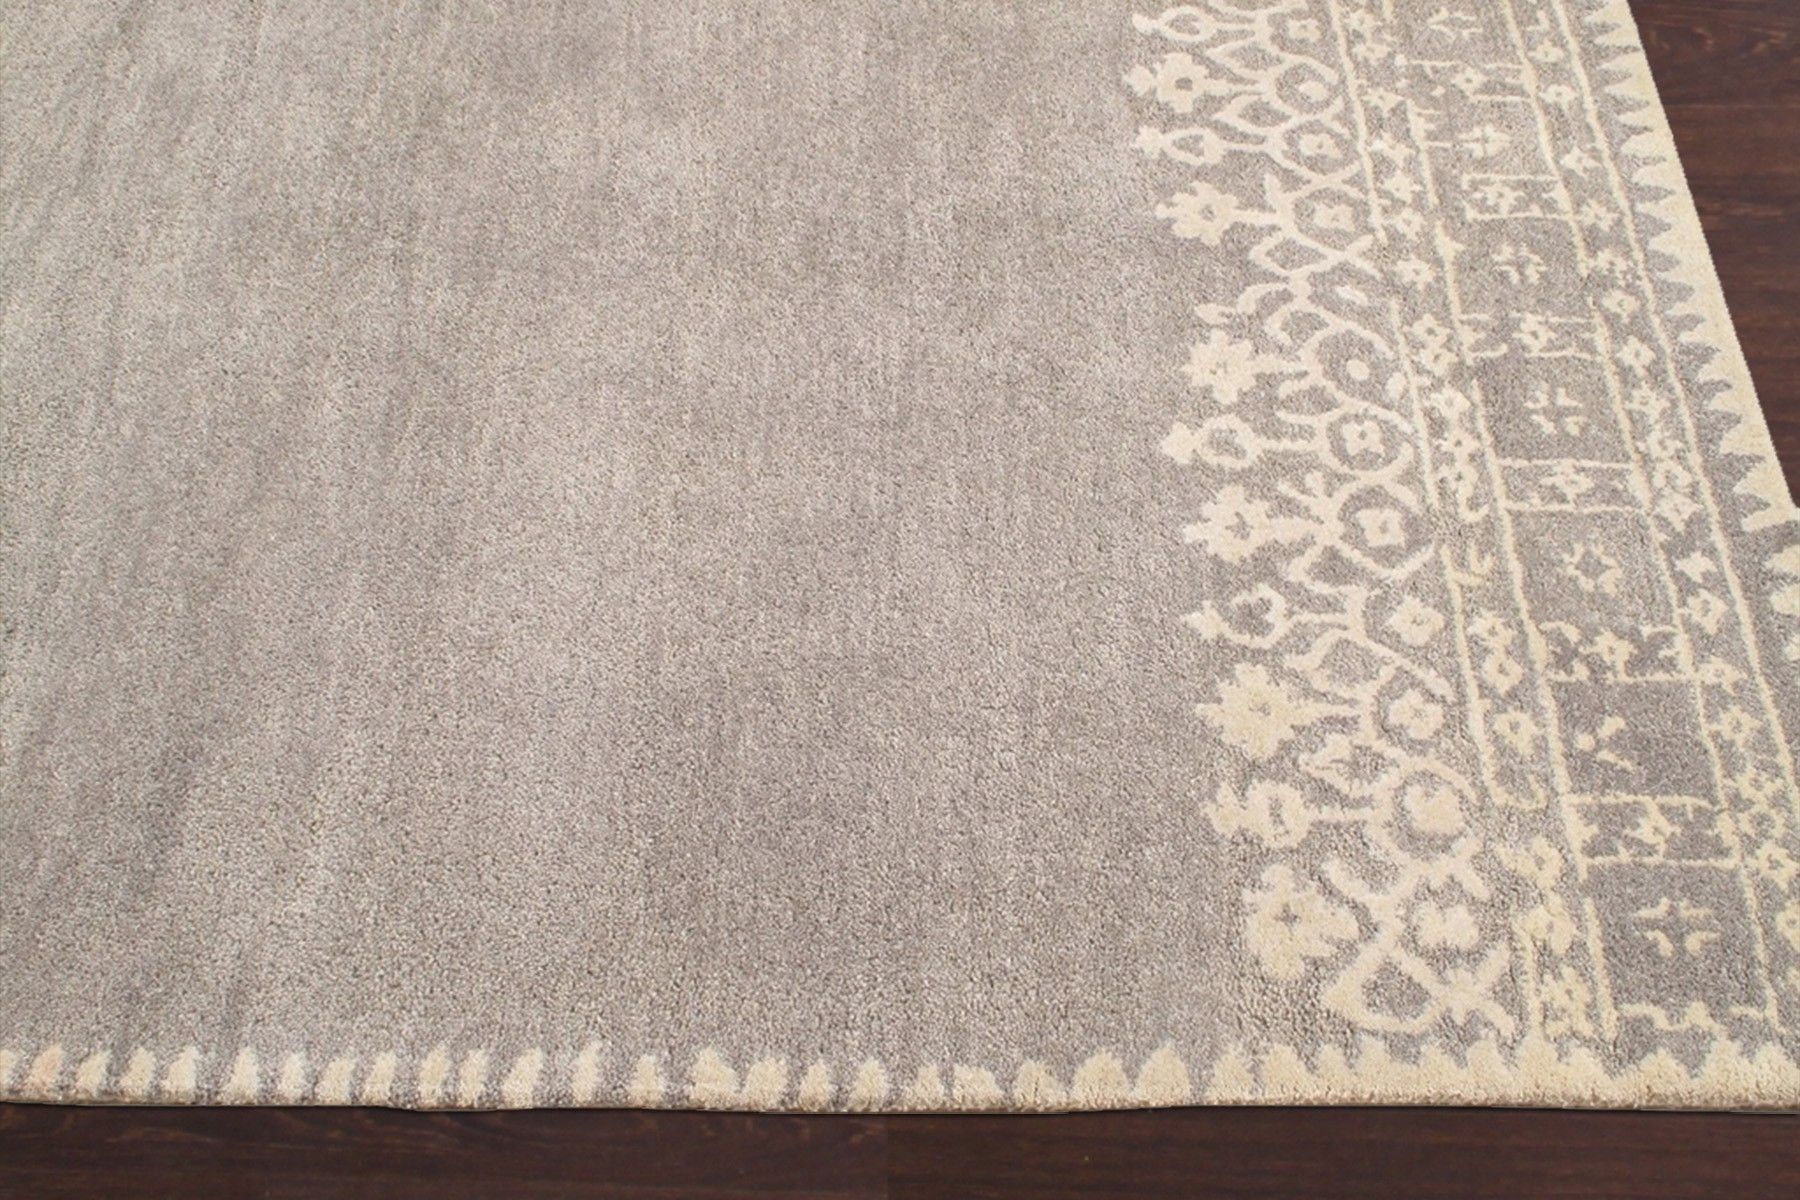 Wool Area Rugs Square Making Wool Area Rugs Design Ideas Decor With Regard To Square Wool Area Rugs (View 2 of 15)